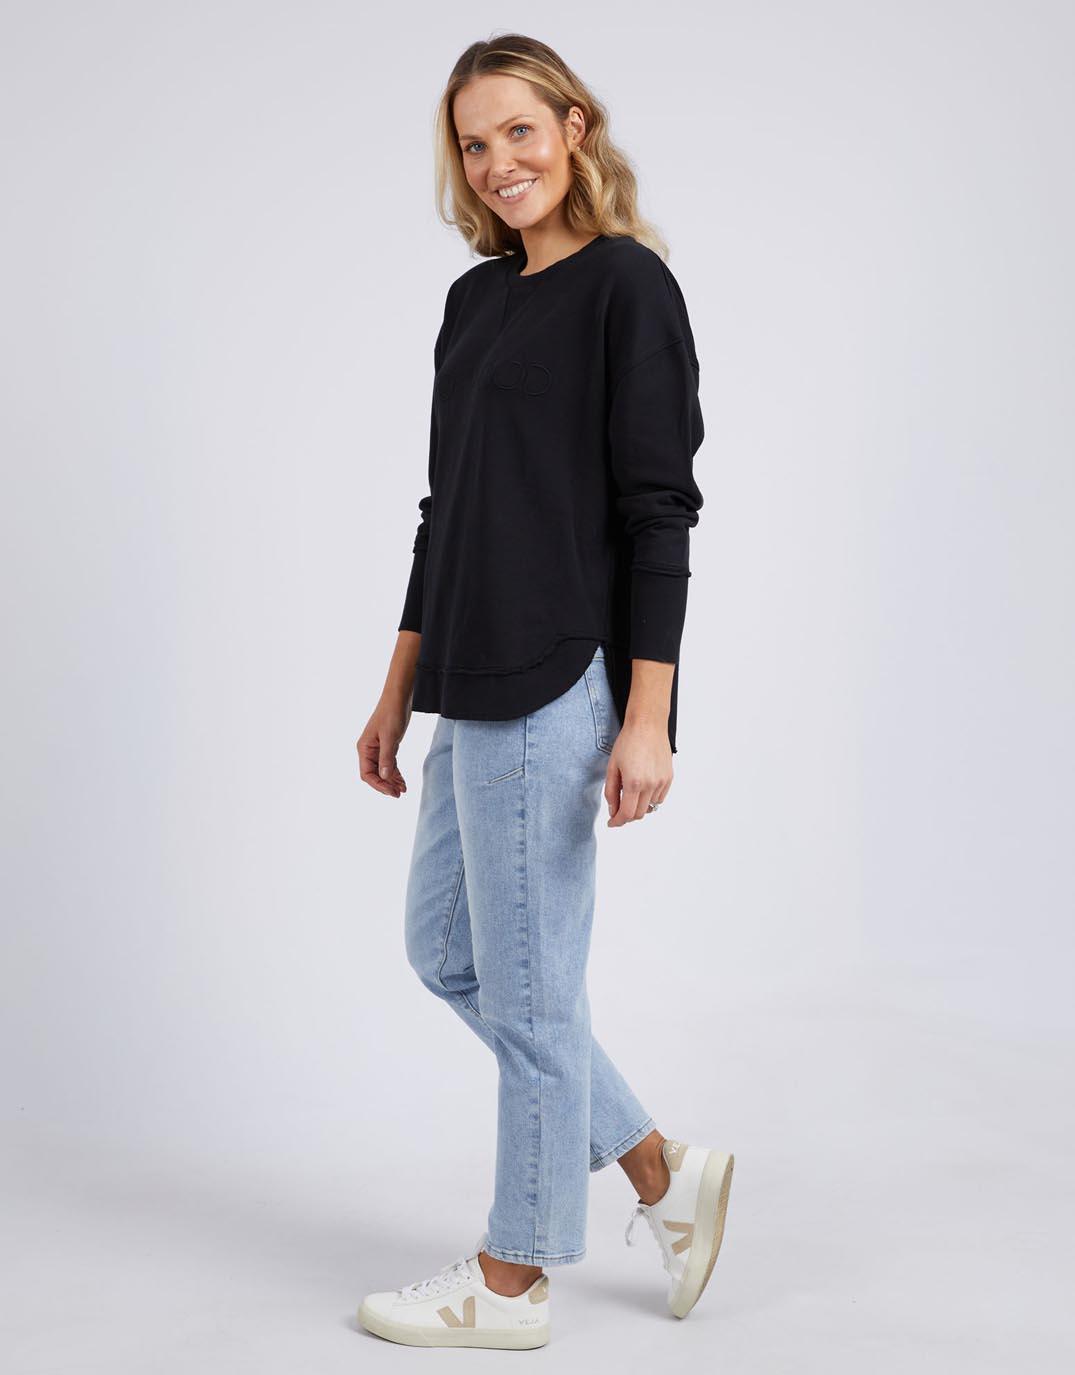 Foxwood - Simplified Crew - Black on Black - White & Co Living Jumpers